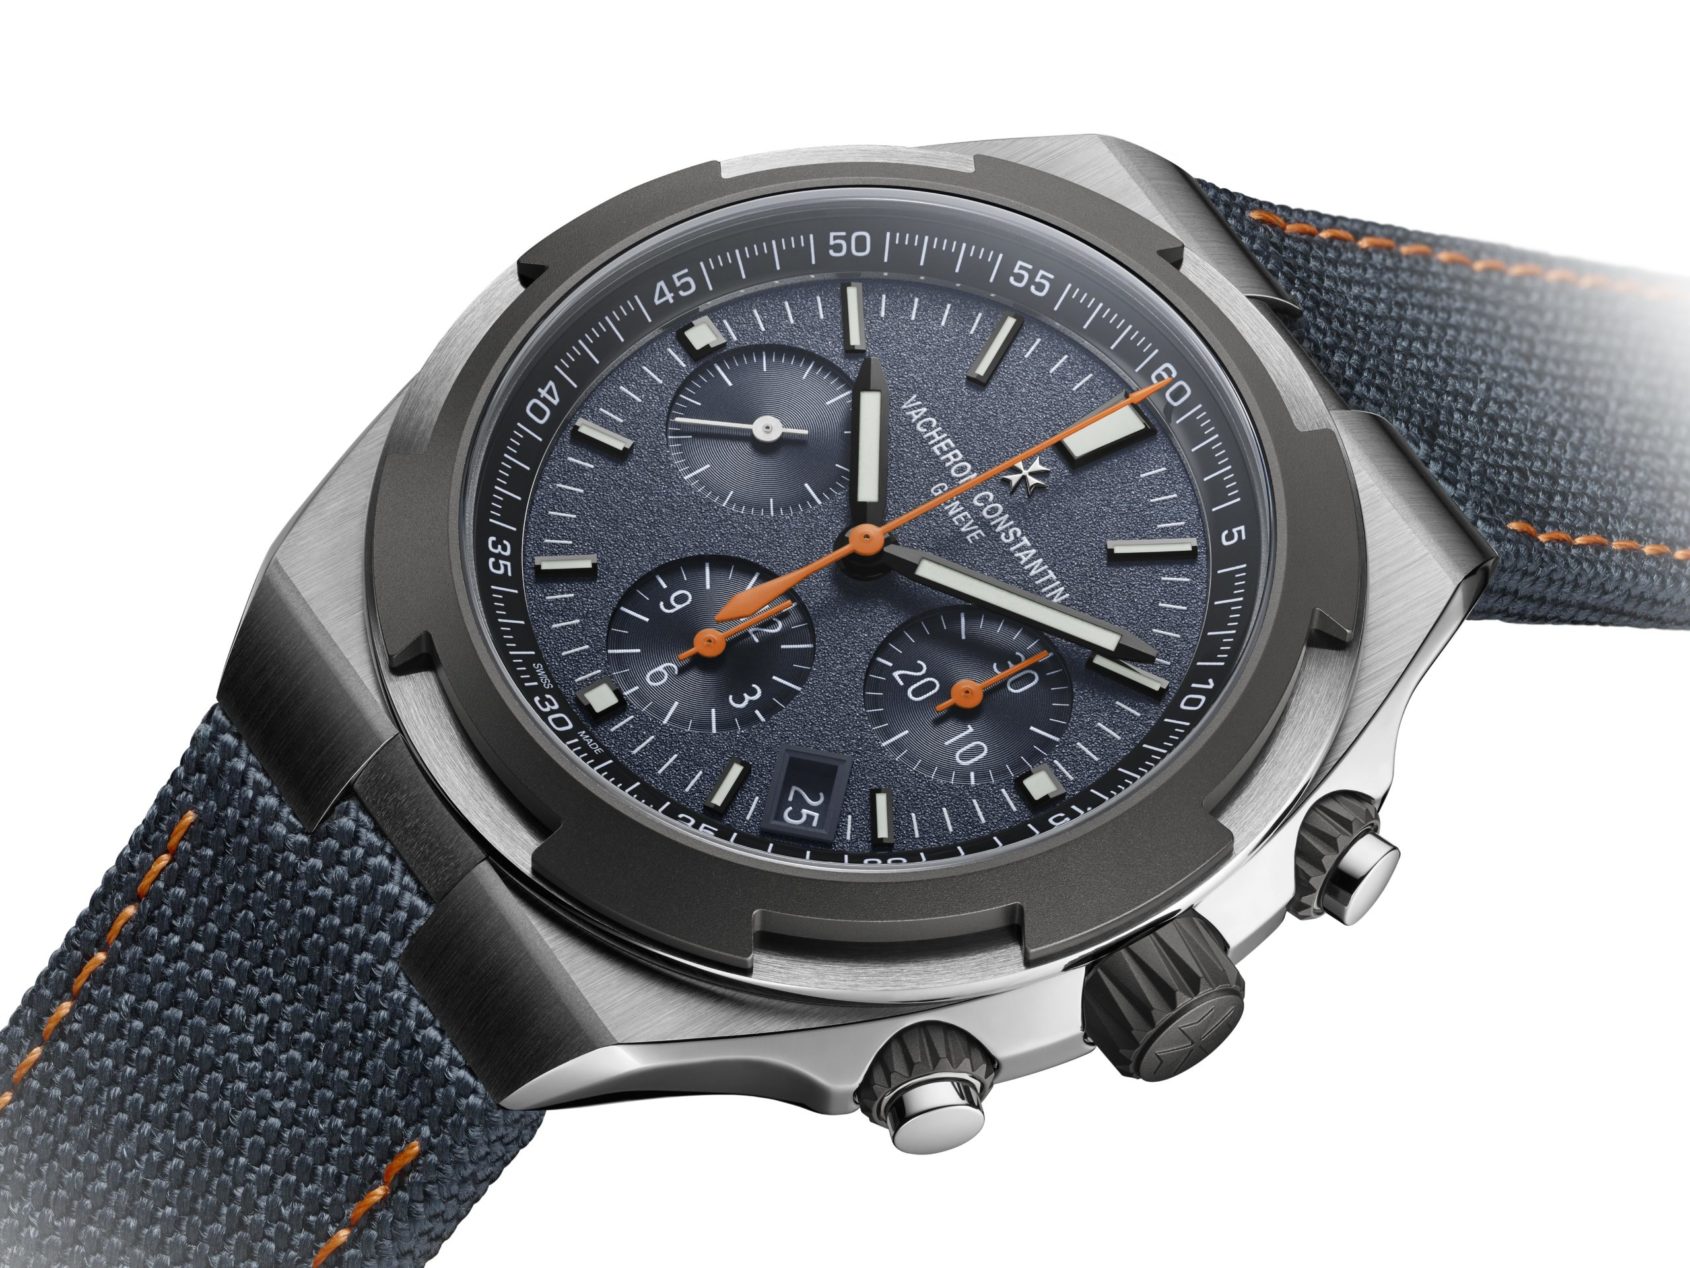 Introducing: the Vacheron Constantin Overseas Limited Editions “Everest”